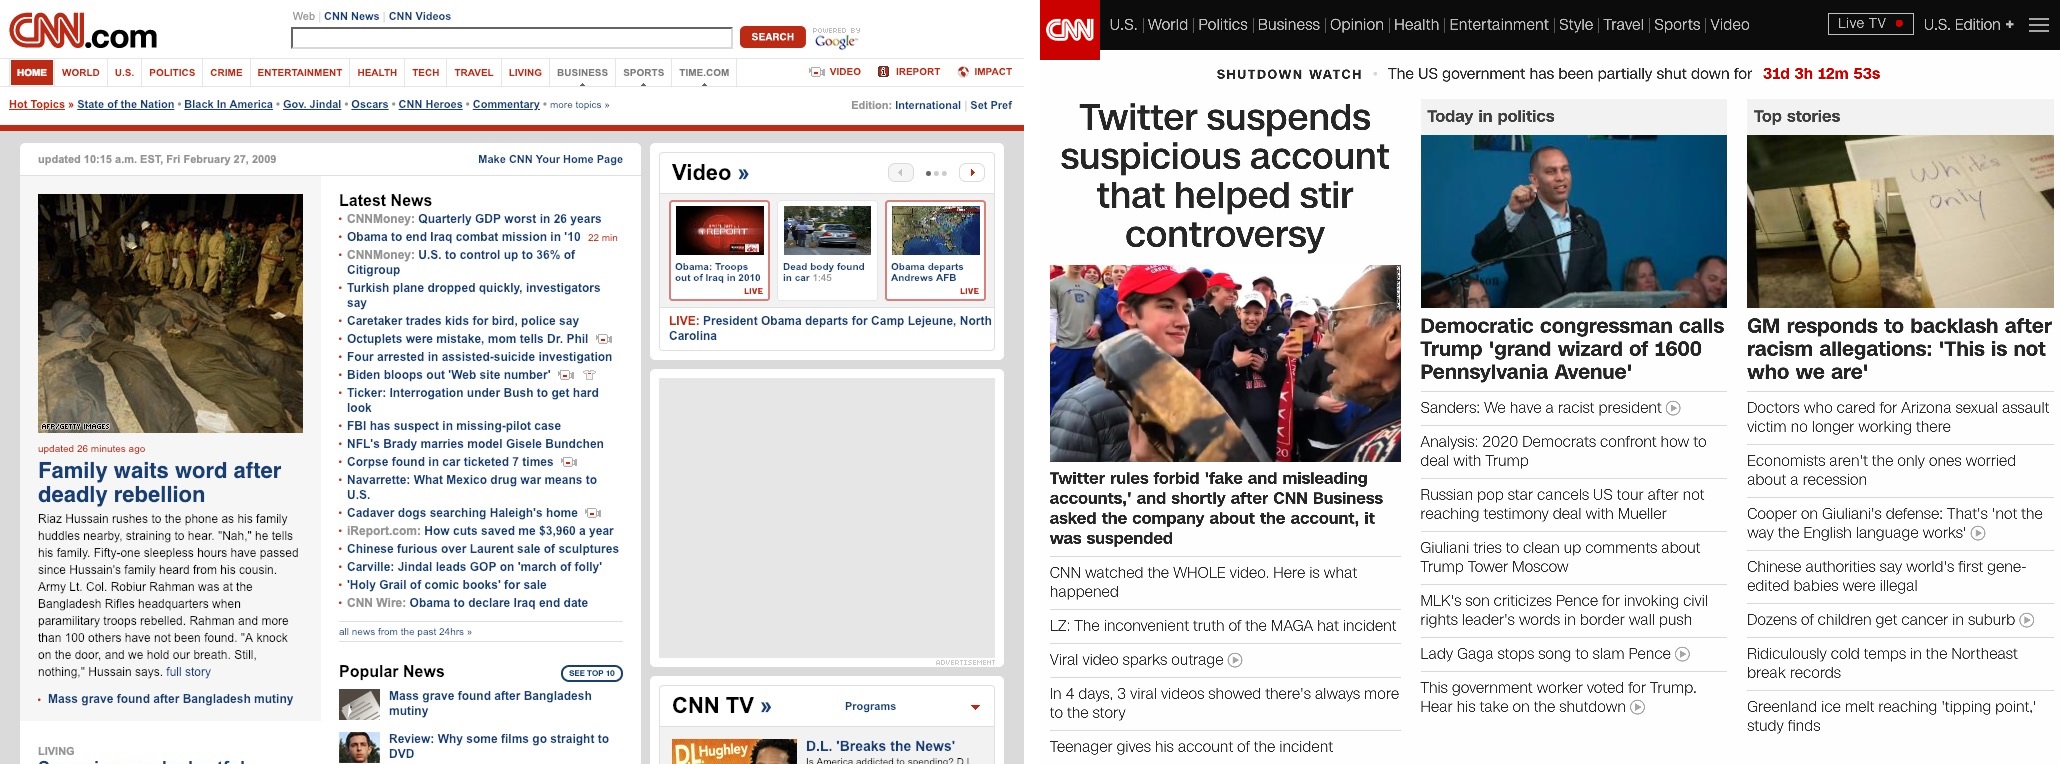 Cnn.com . Ba 53 Tapore On Www H Ome Watch The Twitter suspends in suspicious account that helped stir controversy Video spands in tacklash after Democratic congressman as Gm Trumpgrund ward of 1600 Te admissing Cnn Tv Dl